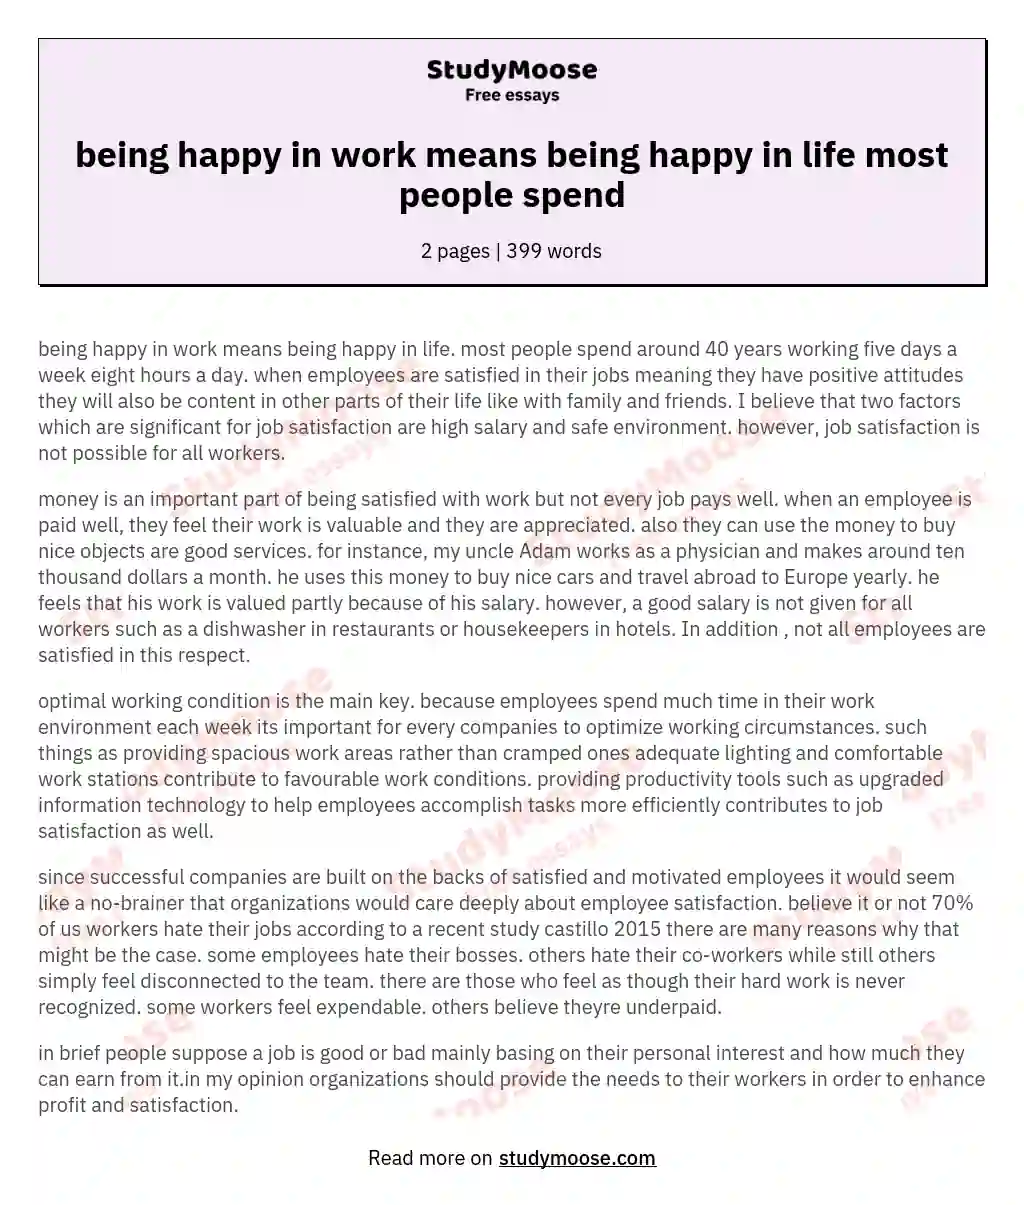 being happy in work means being happy in life most people spend essay